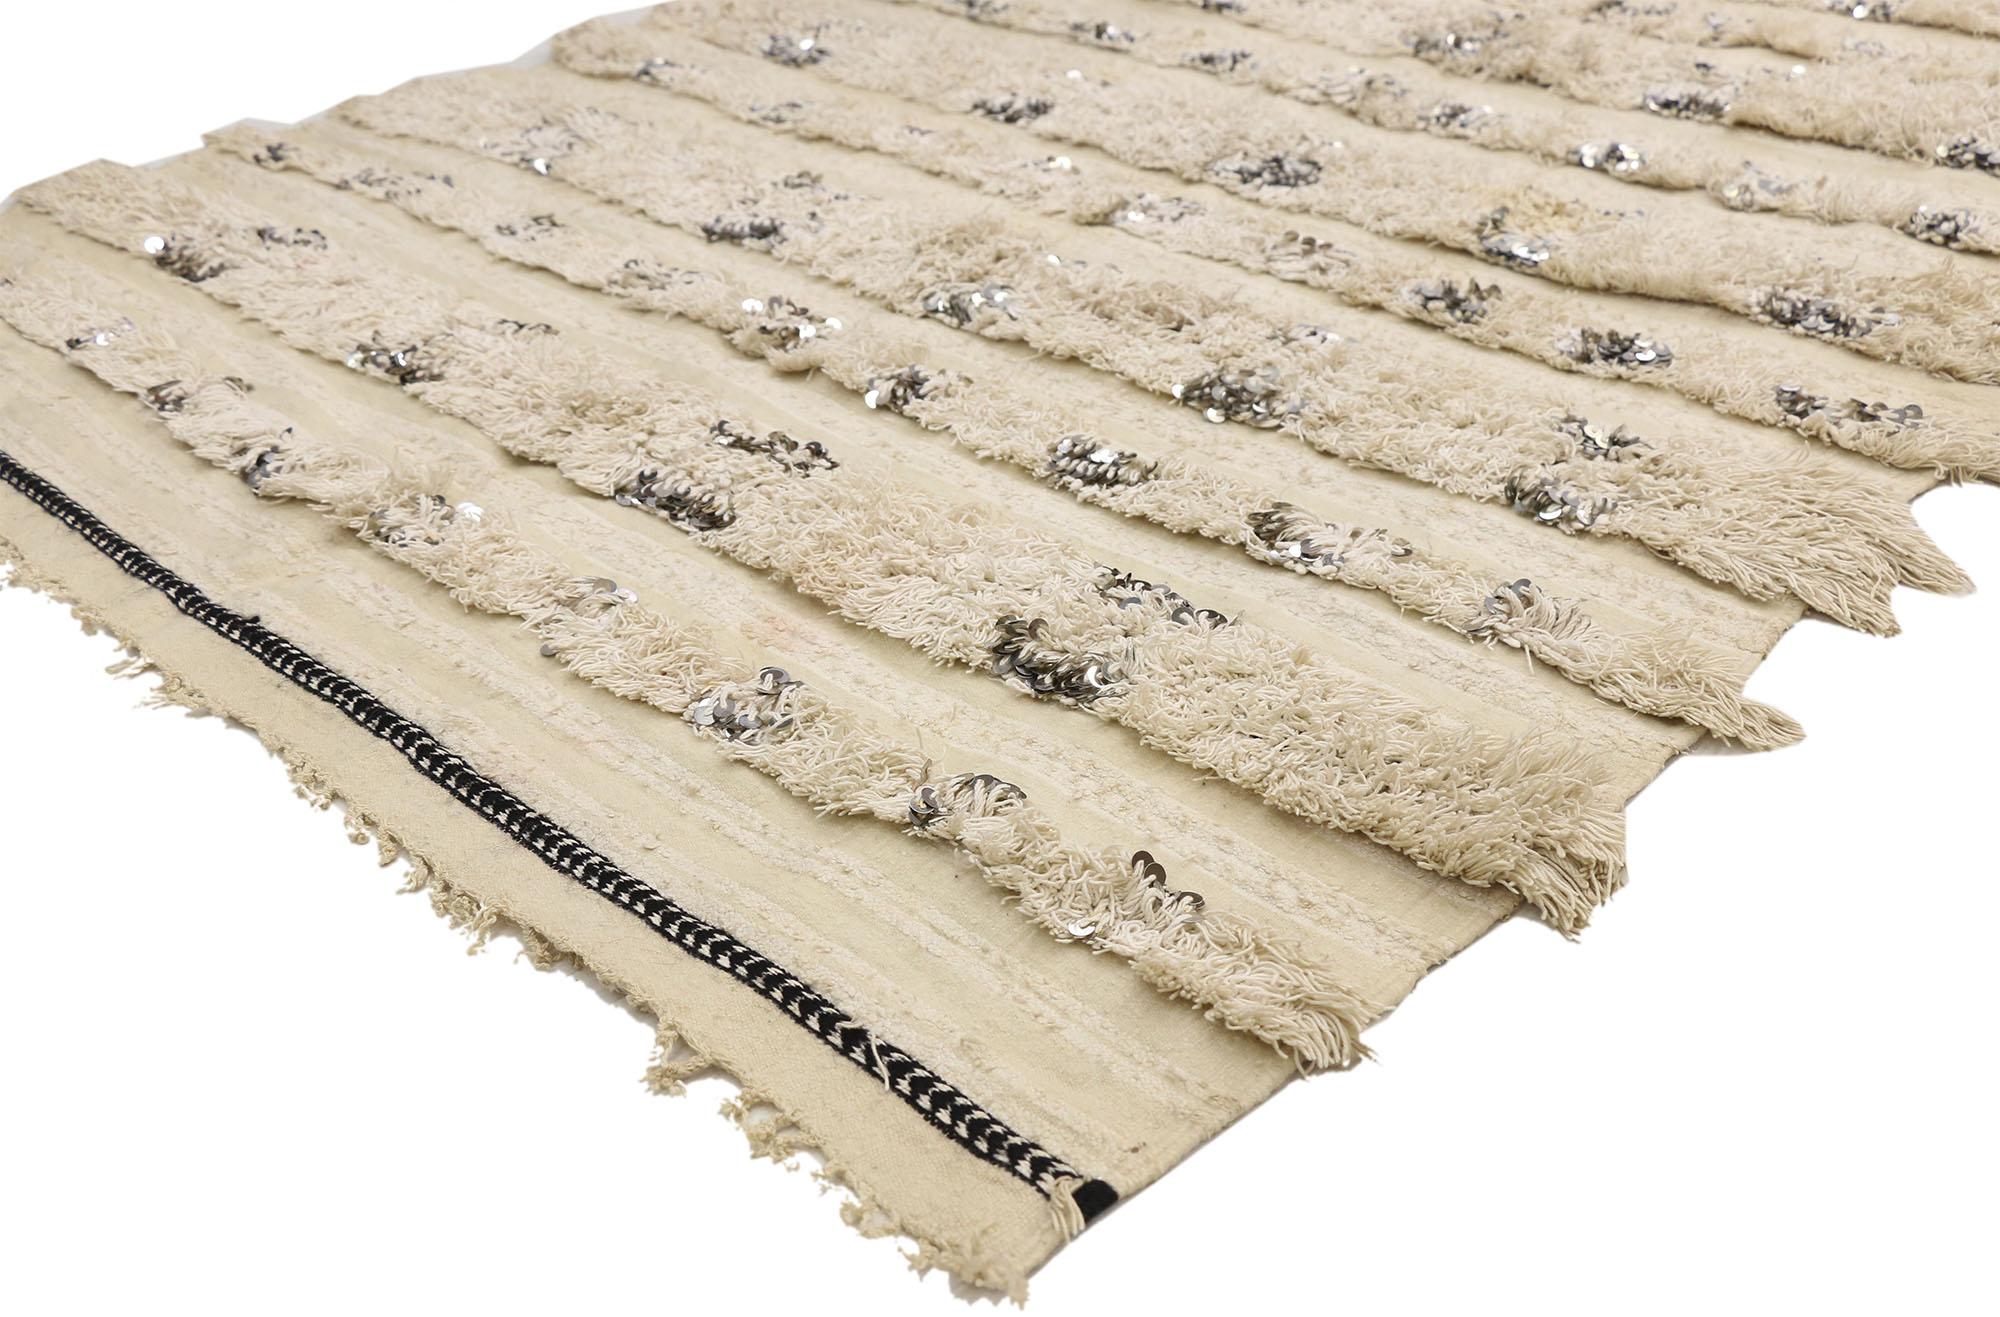 20821, vintage Moroccan wedding blanket, Berber Handira Tamizart. This handwoven wool vintage Moroccan wedding blanket also known as a Berber Handira features rows of fluffy fringe embellished with paillette sequins. The underside of this vintage